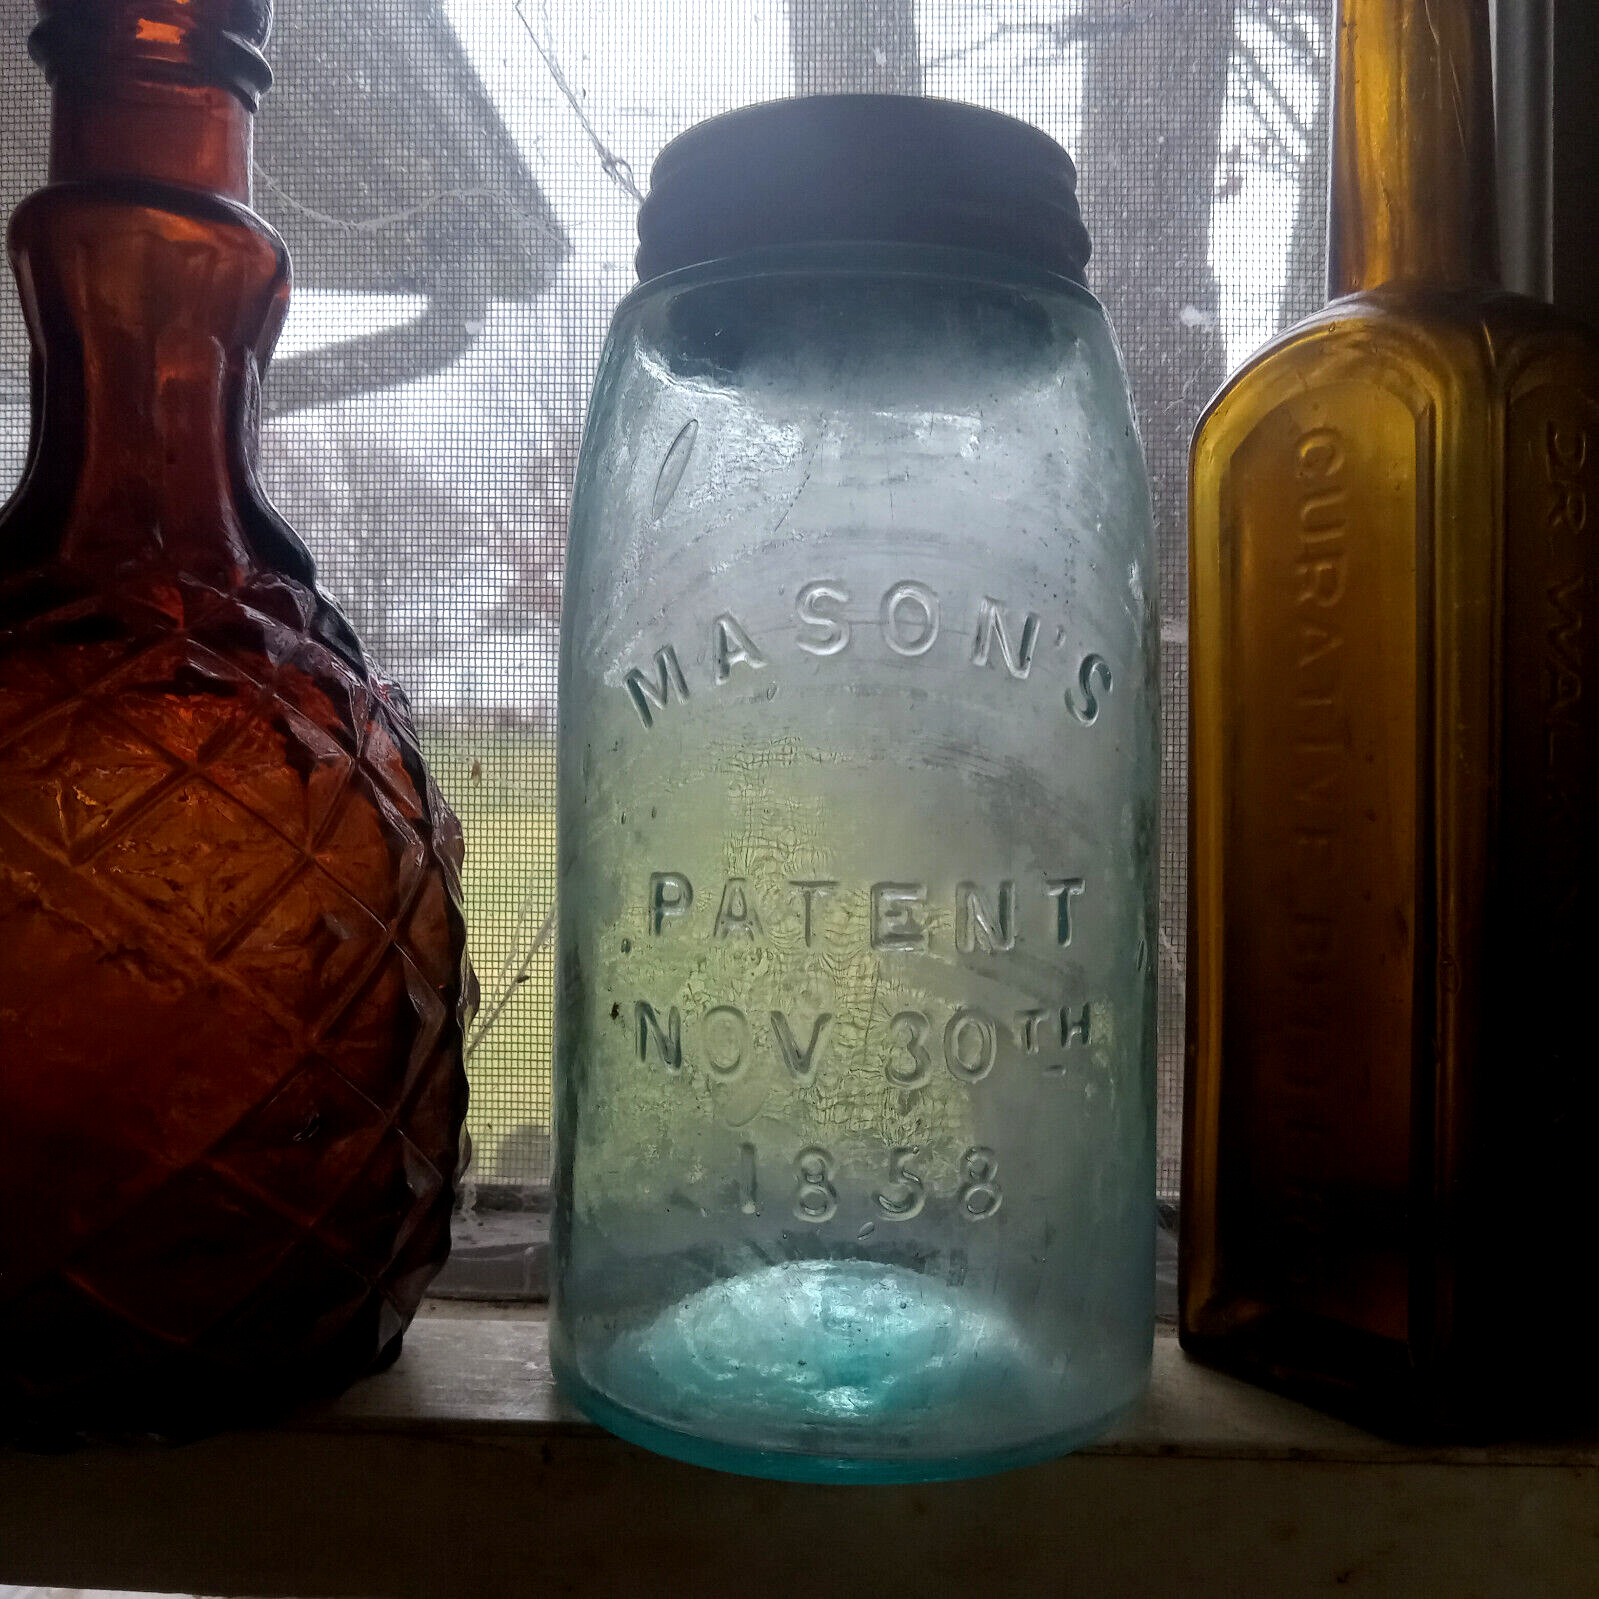 EARLY MASON\'S PATENT NOV 30TH 1858 SMALL BOLD LETTERS FRUIT JAR DUG 1870 PRIVY